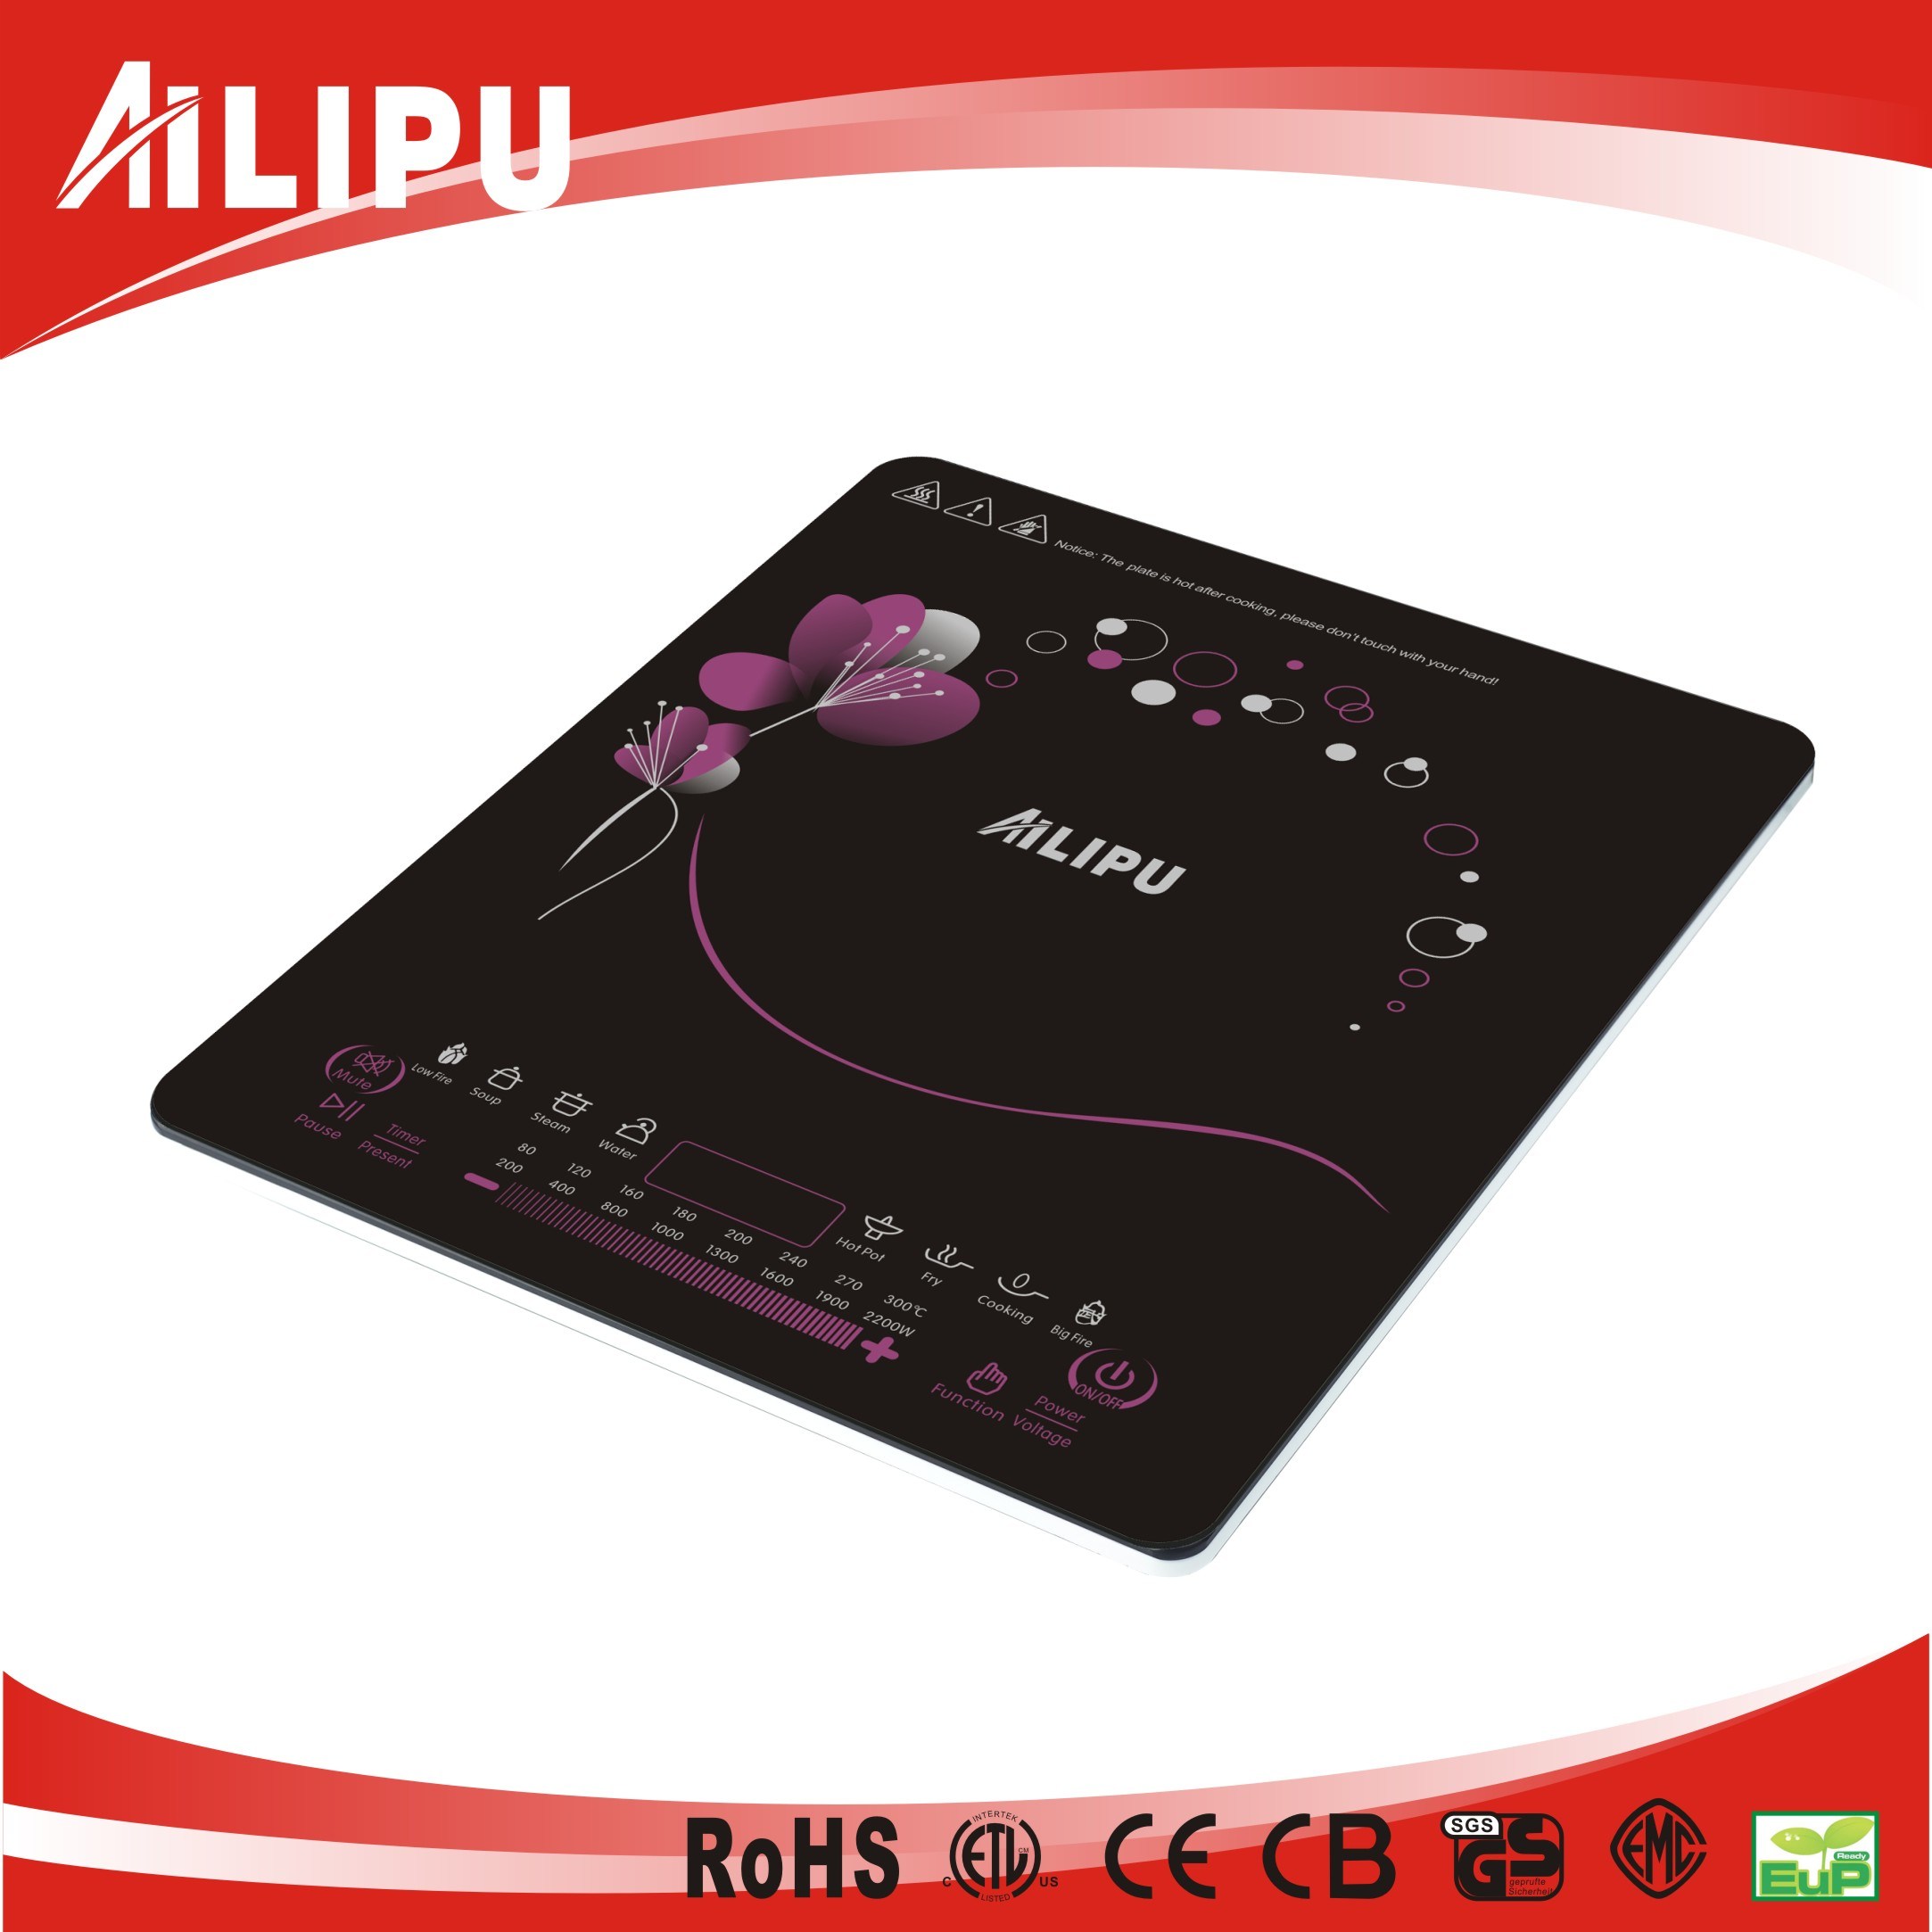 2015 Home Appliance, Kitchenware, Induction Heater, Stove, Induction, Sliding Touch, Slim Body (SM-A37s)